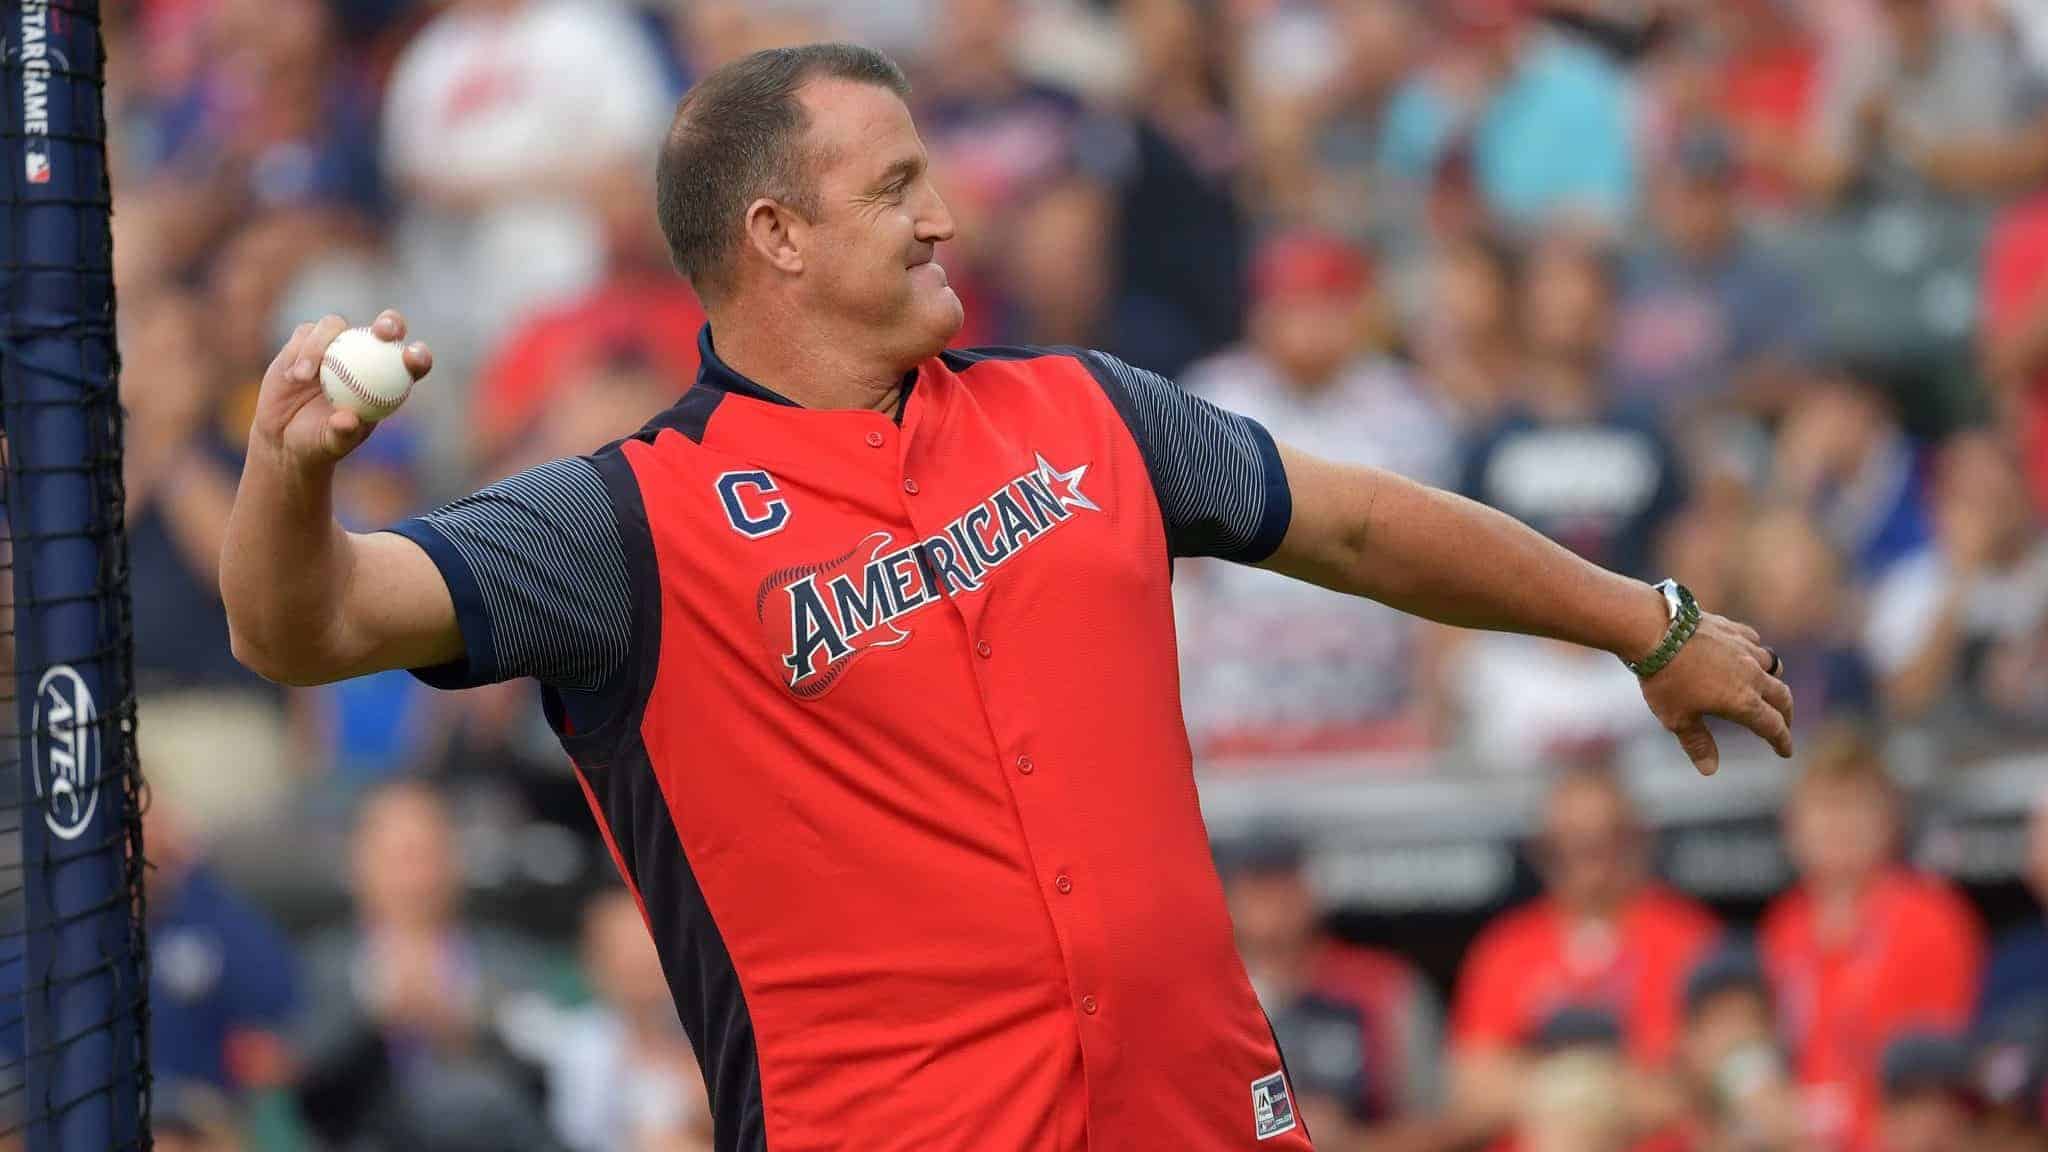 CLEVELAND, OHIO - JULY 08: Former Cleveland Indian Jim Thome throws out the ceremonial first pitch prior to the T-Mobile Home Run Derby at Progressive Field on July 08, 2019 in Cleveland, Ohio.